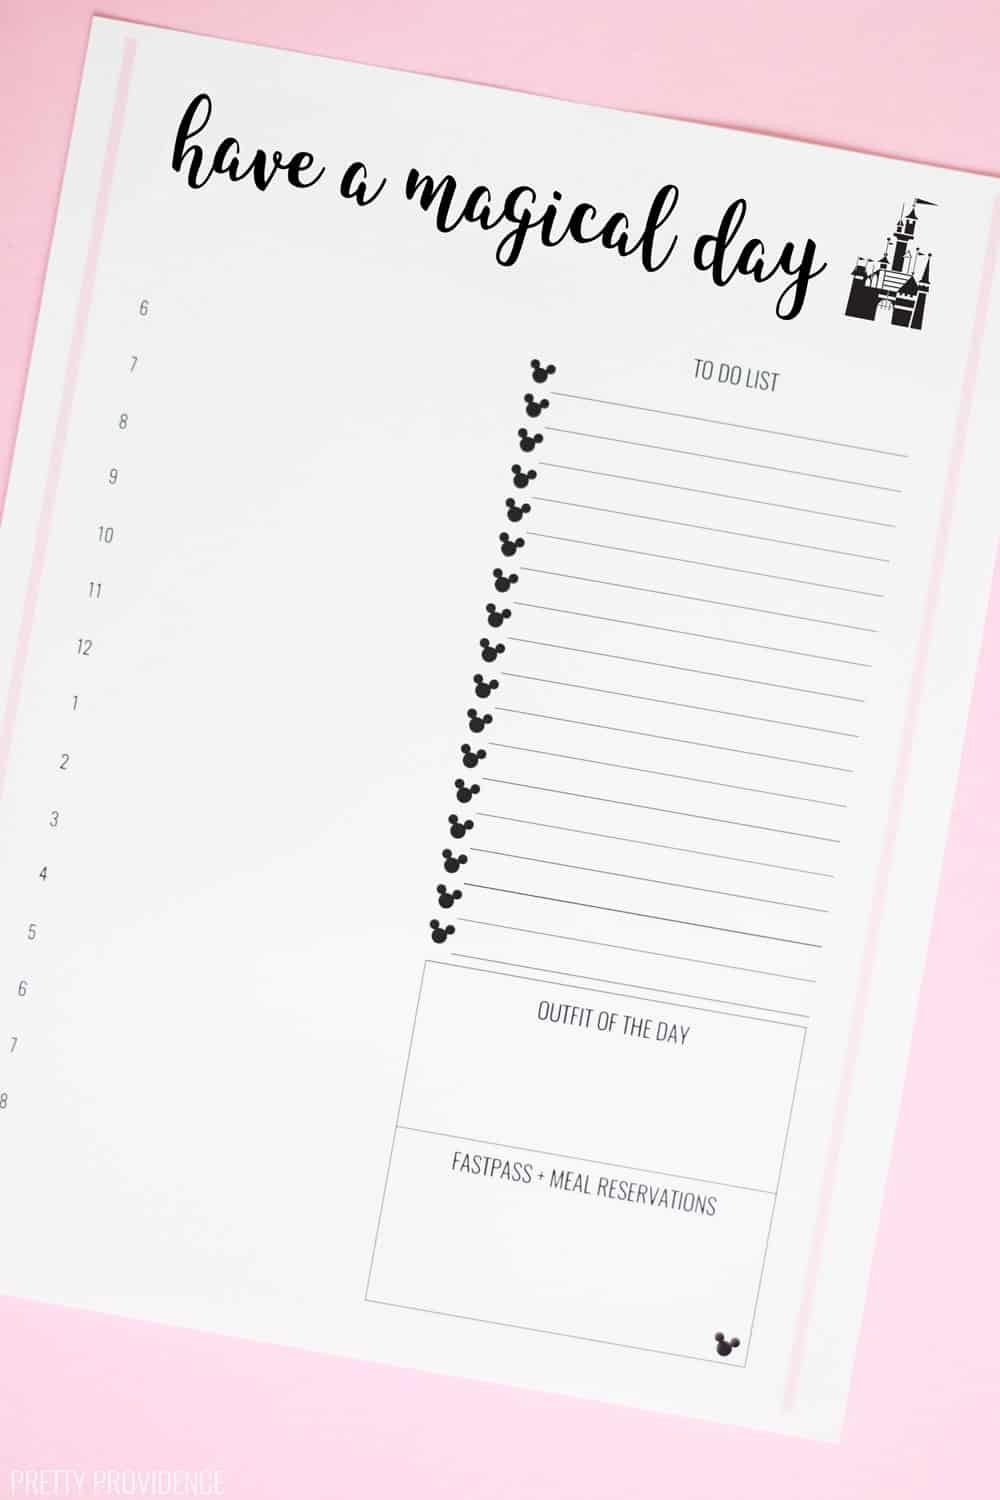 These free Disney trip planner sheets are so helpful when you’re getting ready for a trip to Disney World or Disneyland!